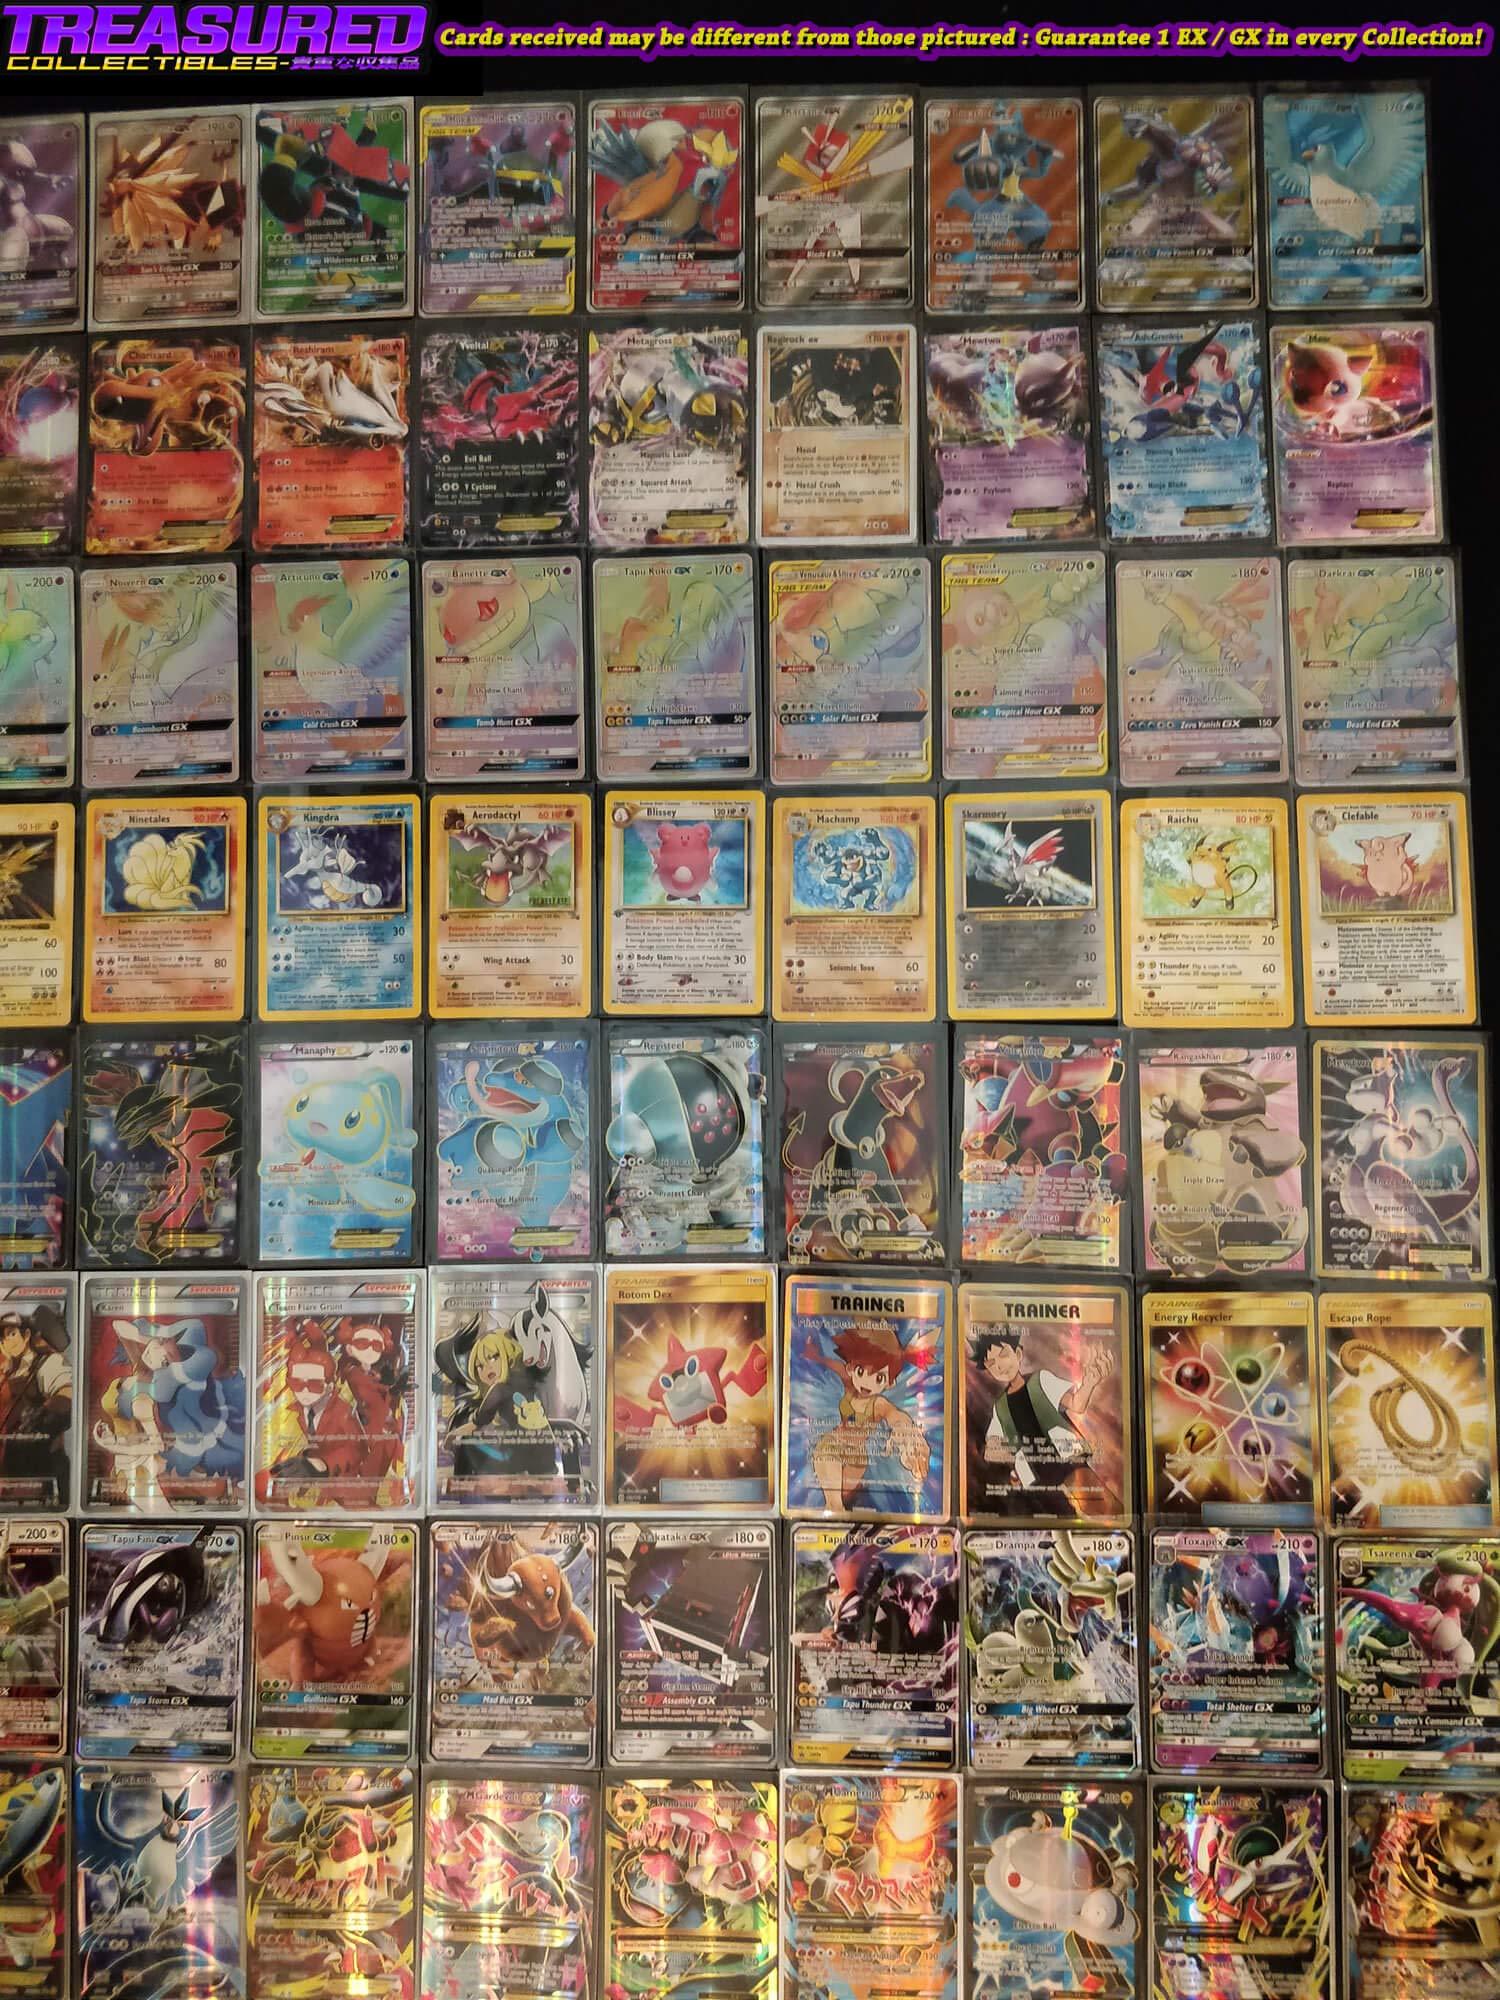 50+ Official Pokemon Cards Binder Collection Booster Box with 5 Foils in Any Combination and at Least 1 Rarity, GX, EX, FA, Tag Team, Or Secret Rare, with Cards Like Charizard and Detective Pikachu